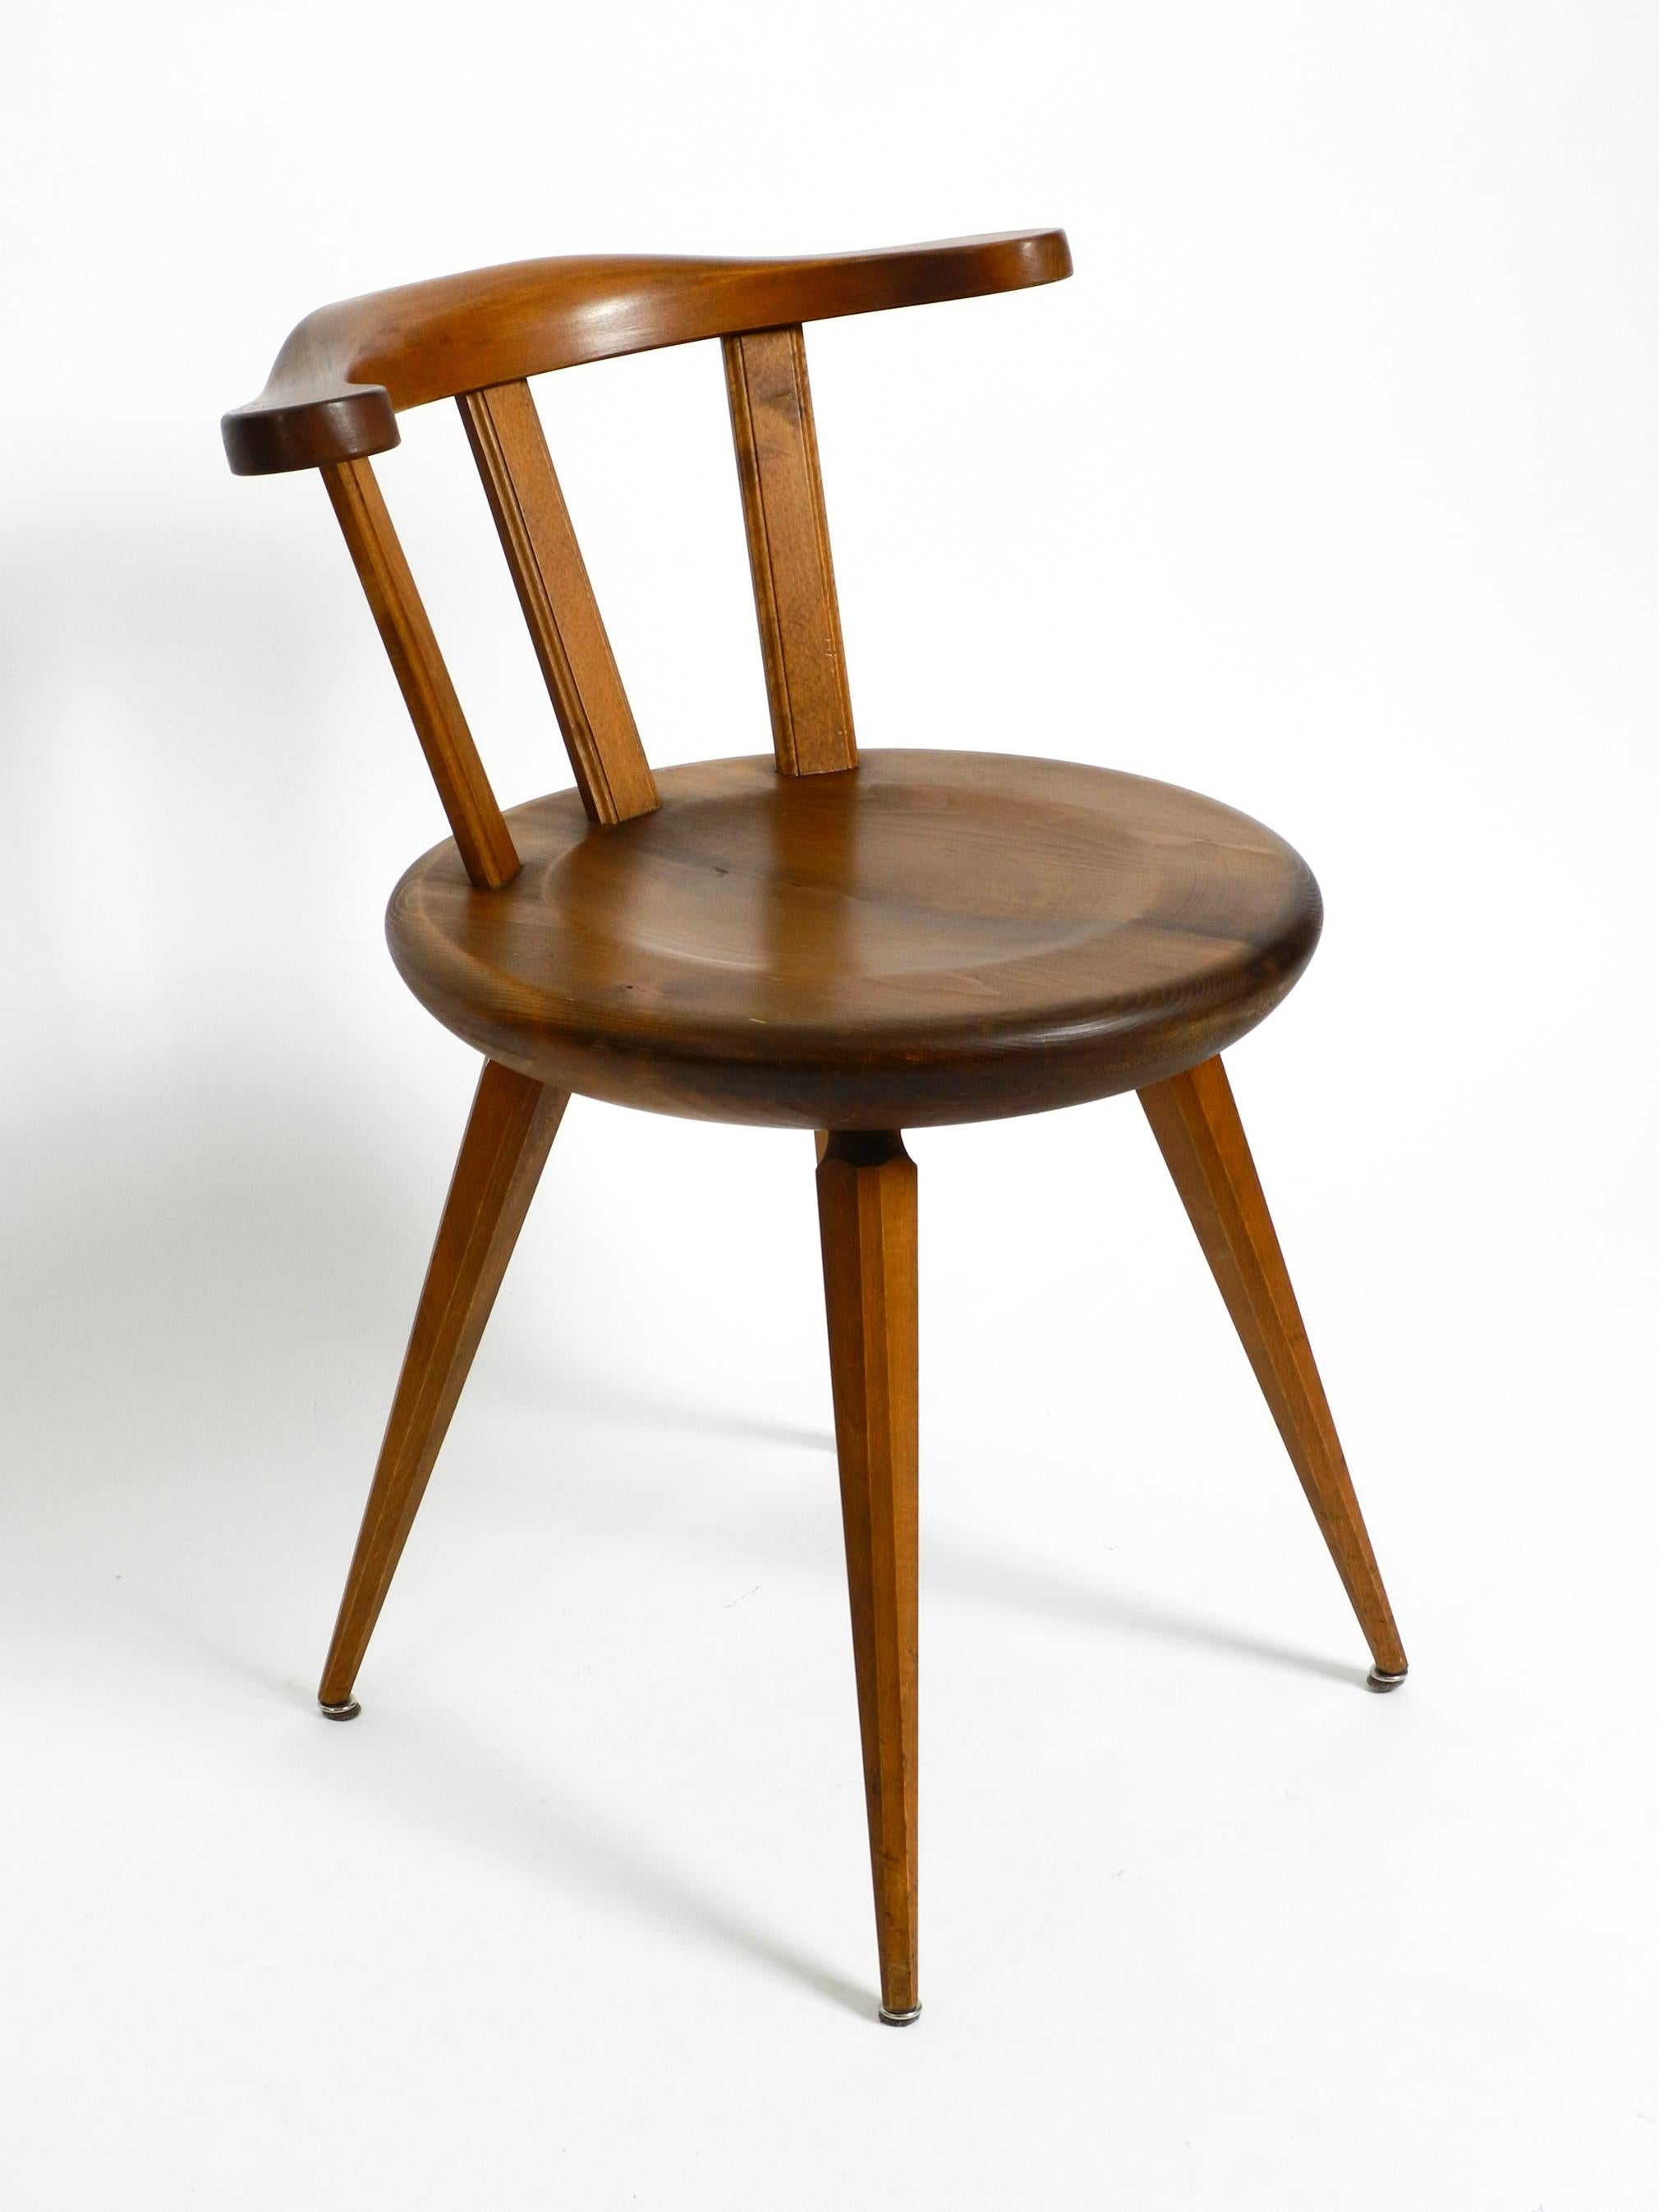 Mid-20th Century Four Massive, Beautiful Mid-Century Solid Wood Sprouted Chairs with Low Backs